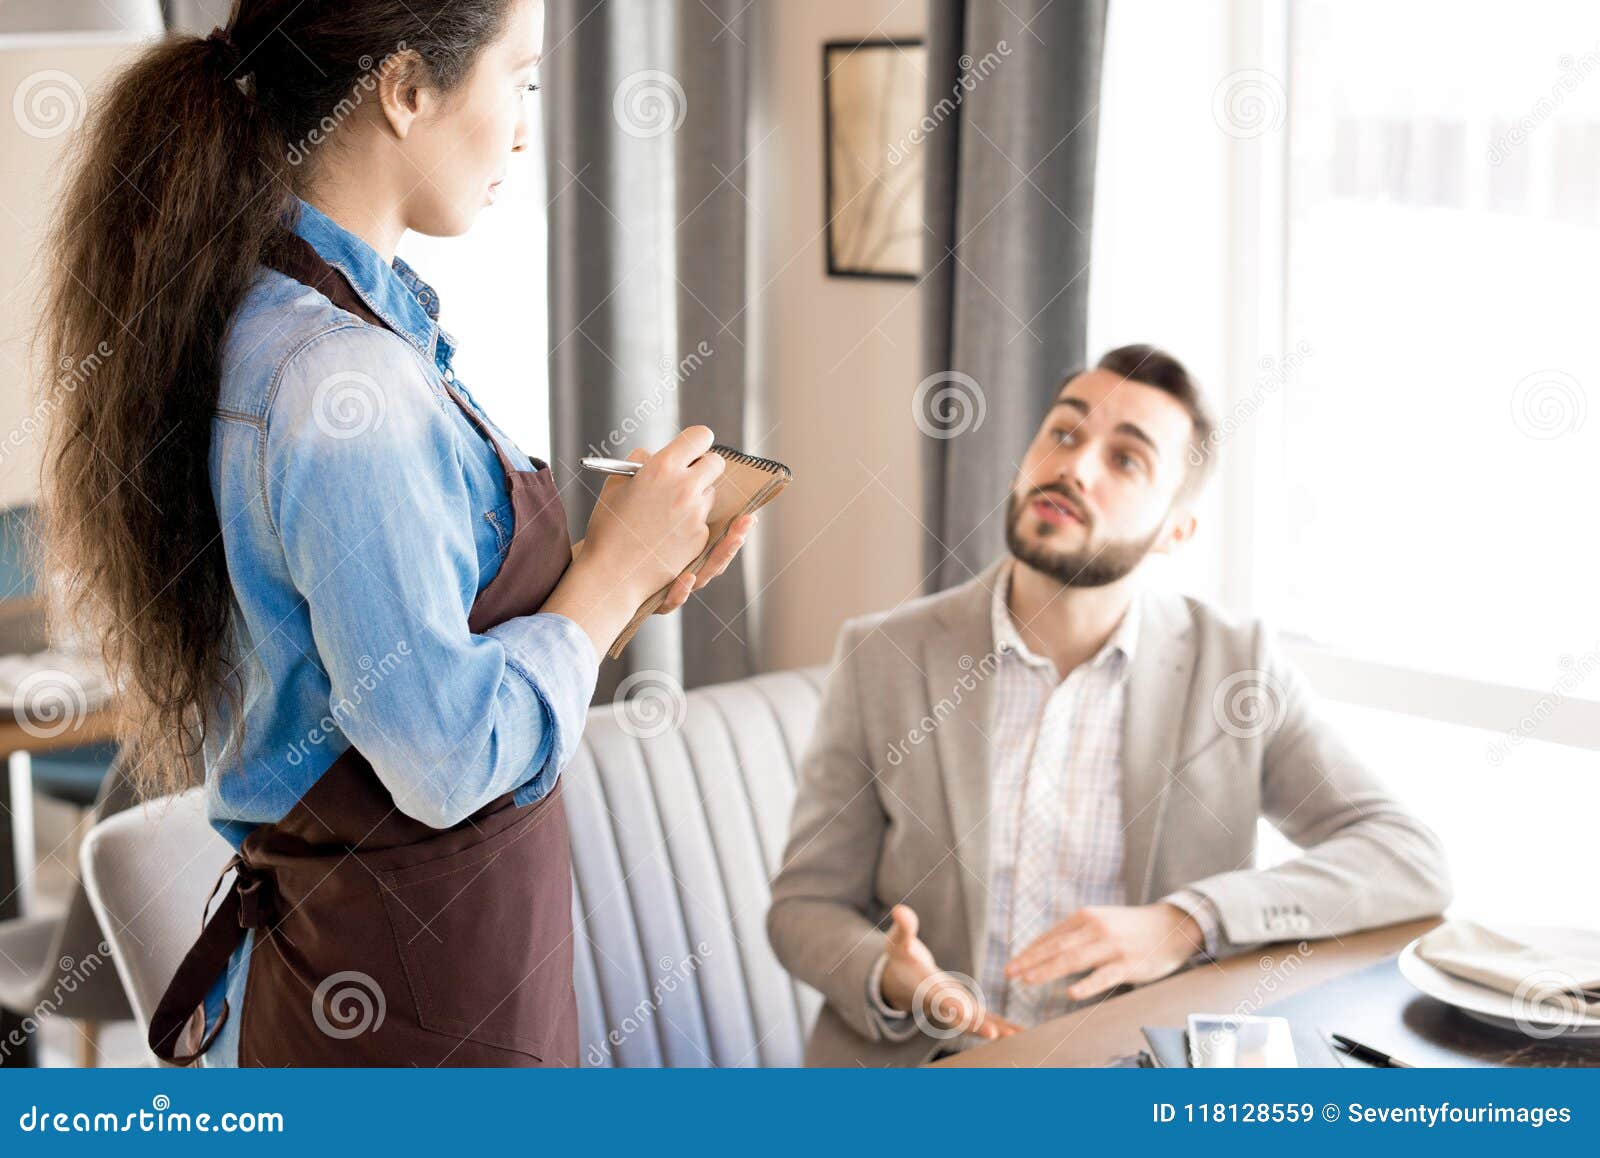 Man Sharing His Taste Preference With Waitress Stock Image